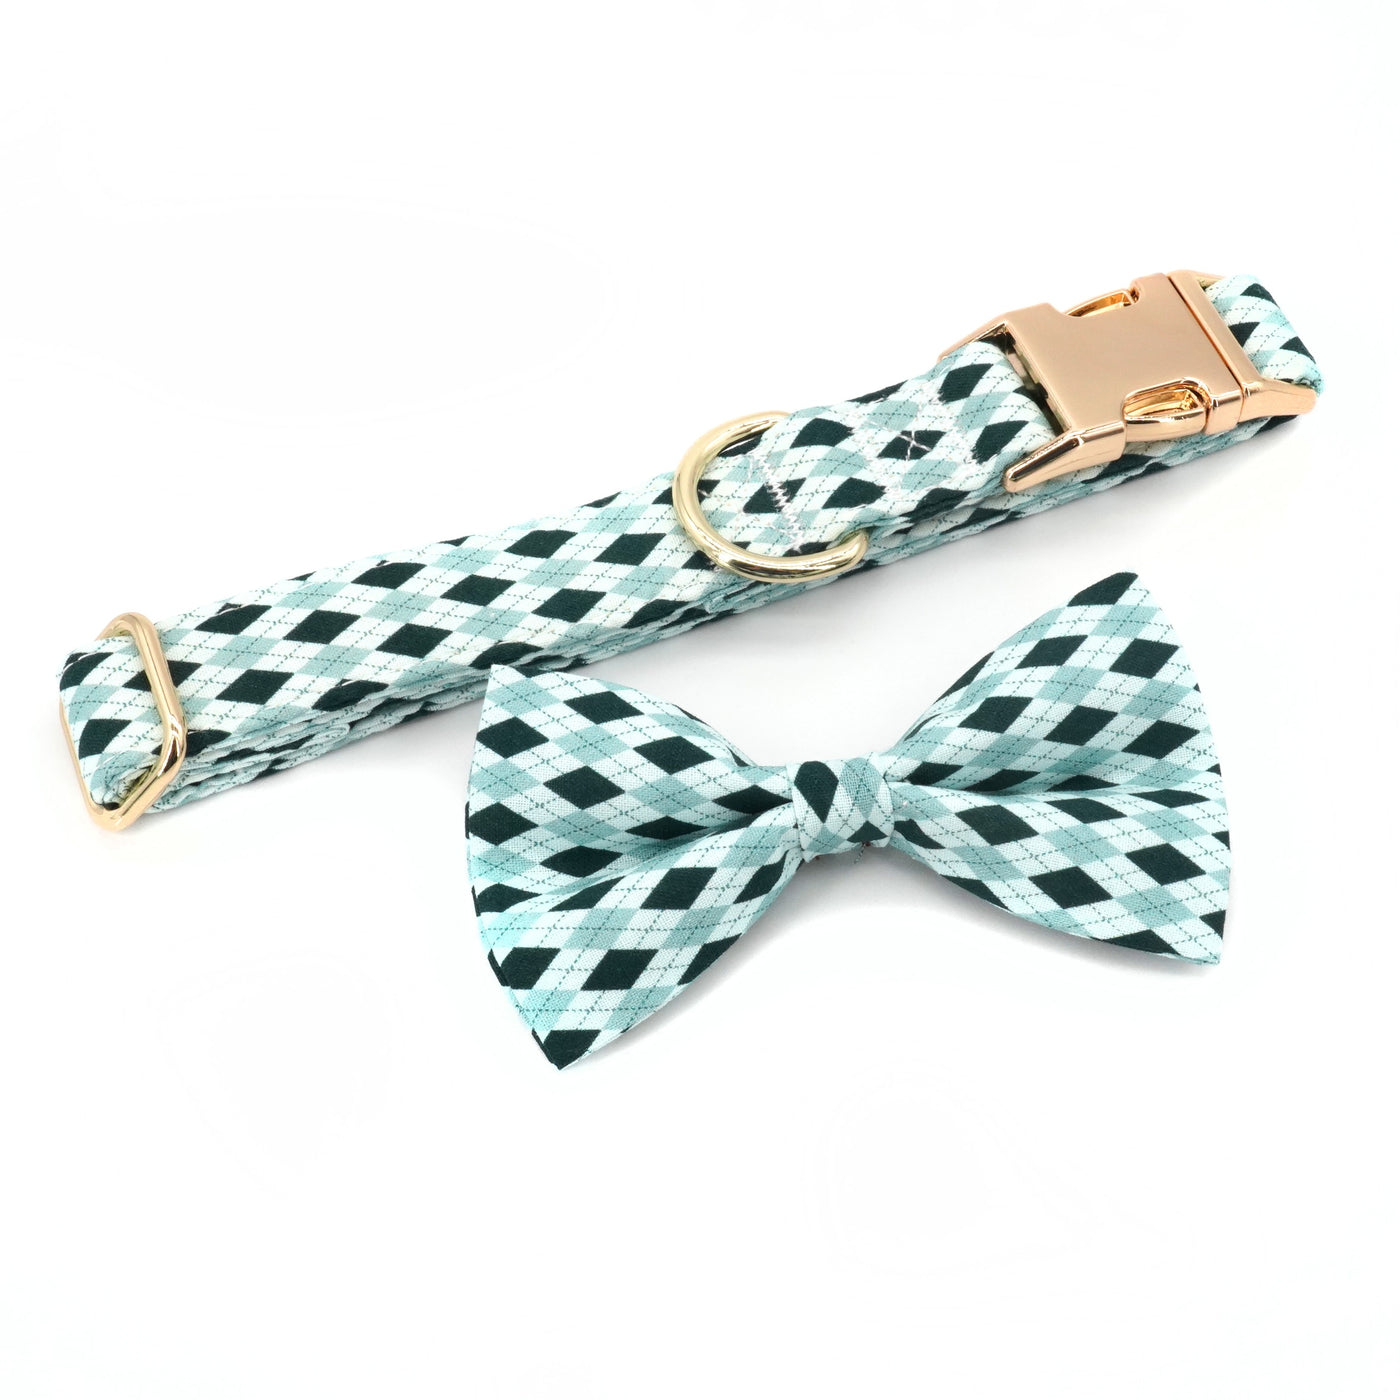 The Mickelson Collar & Leash Set